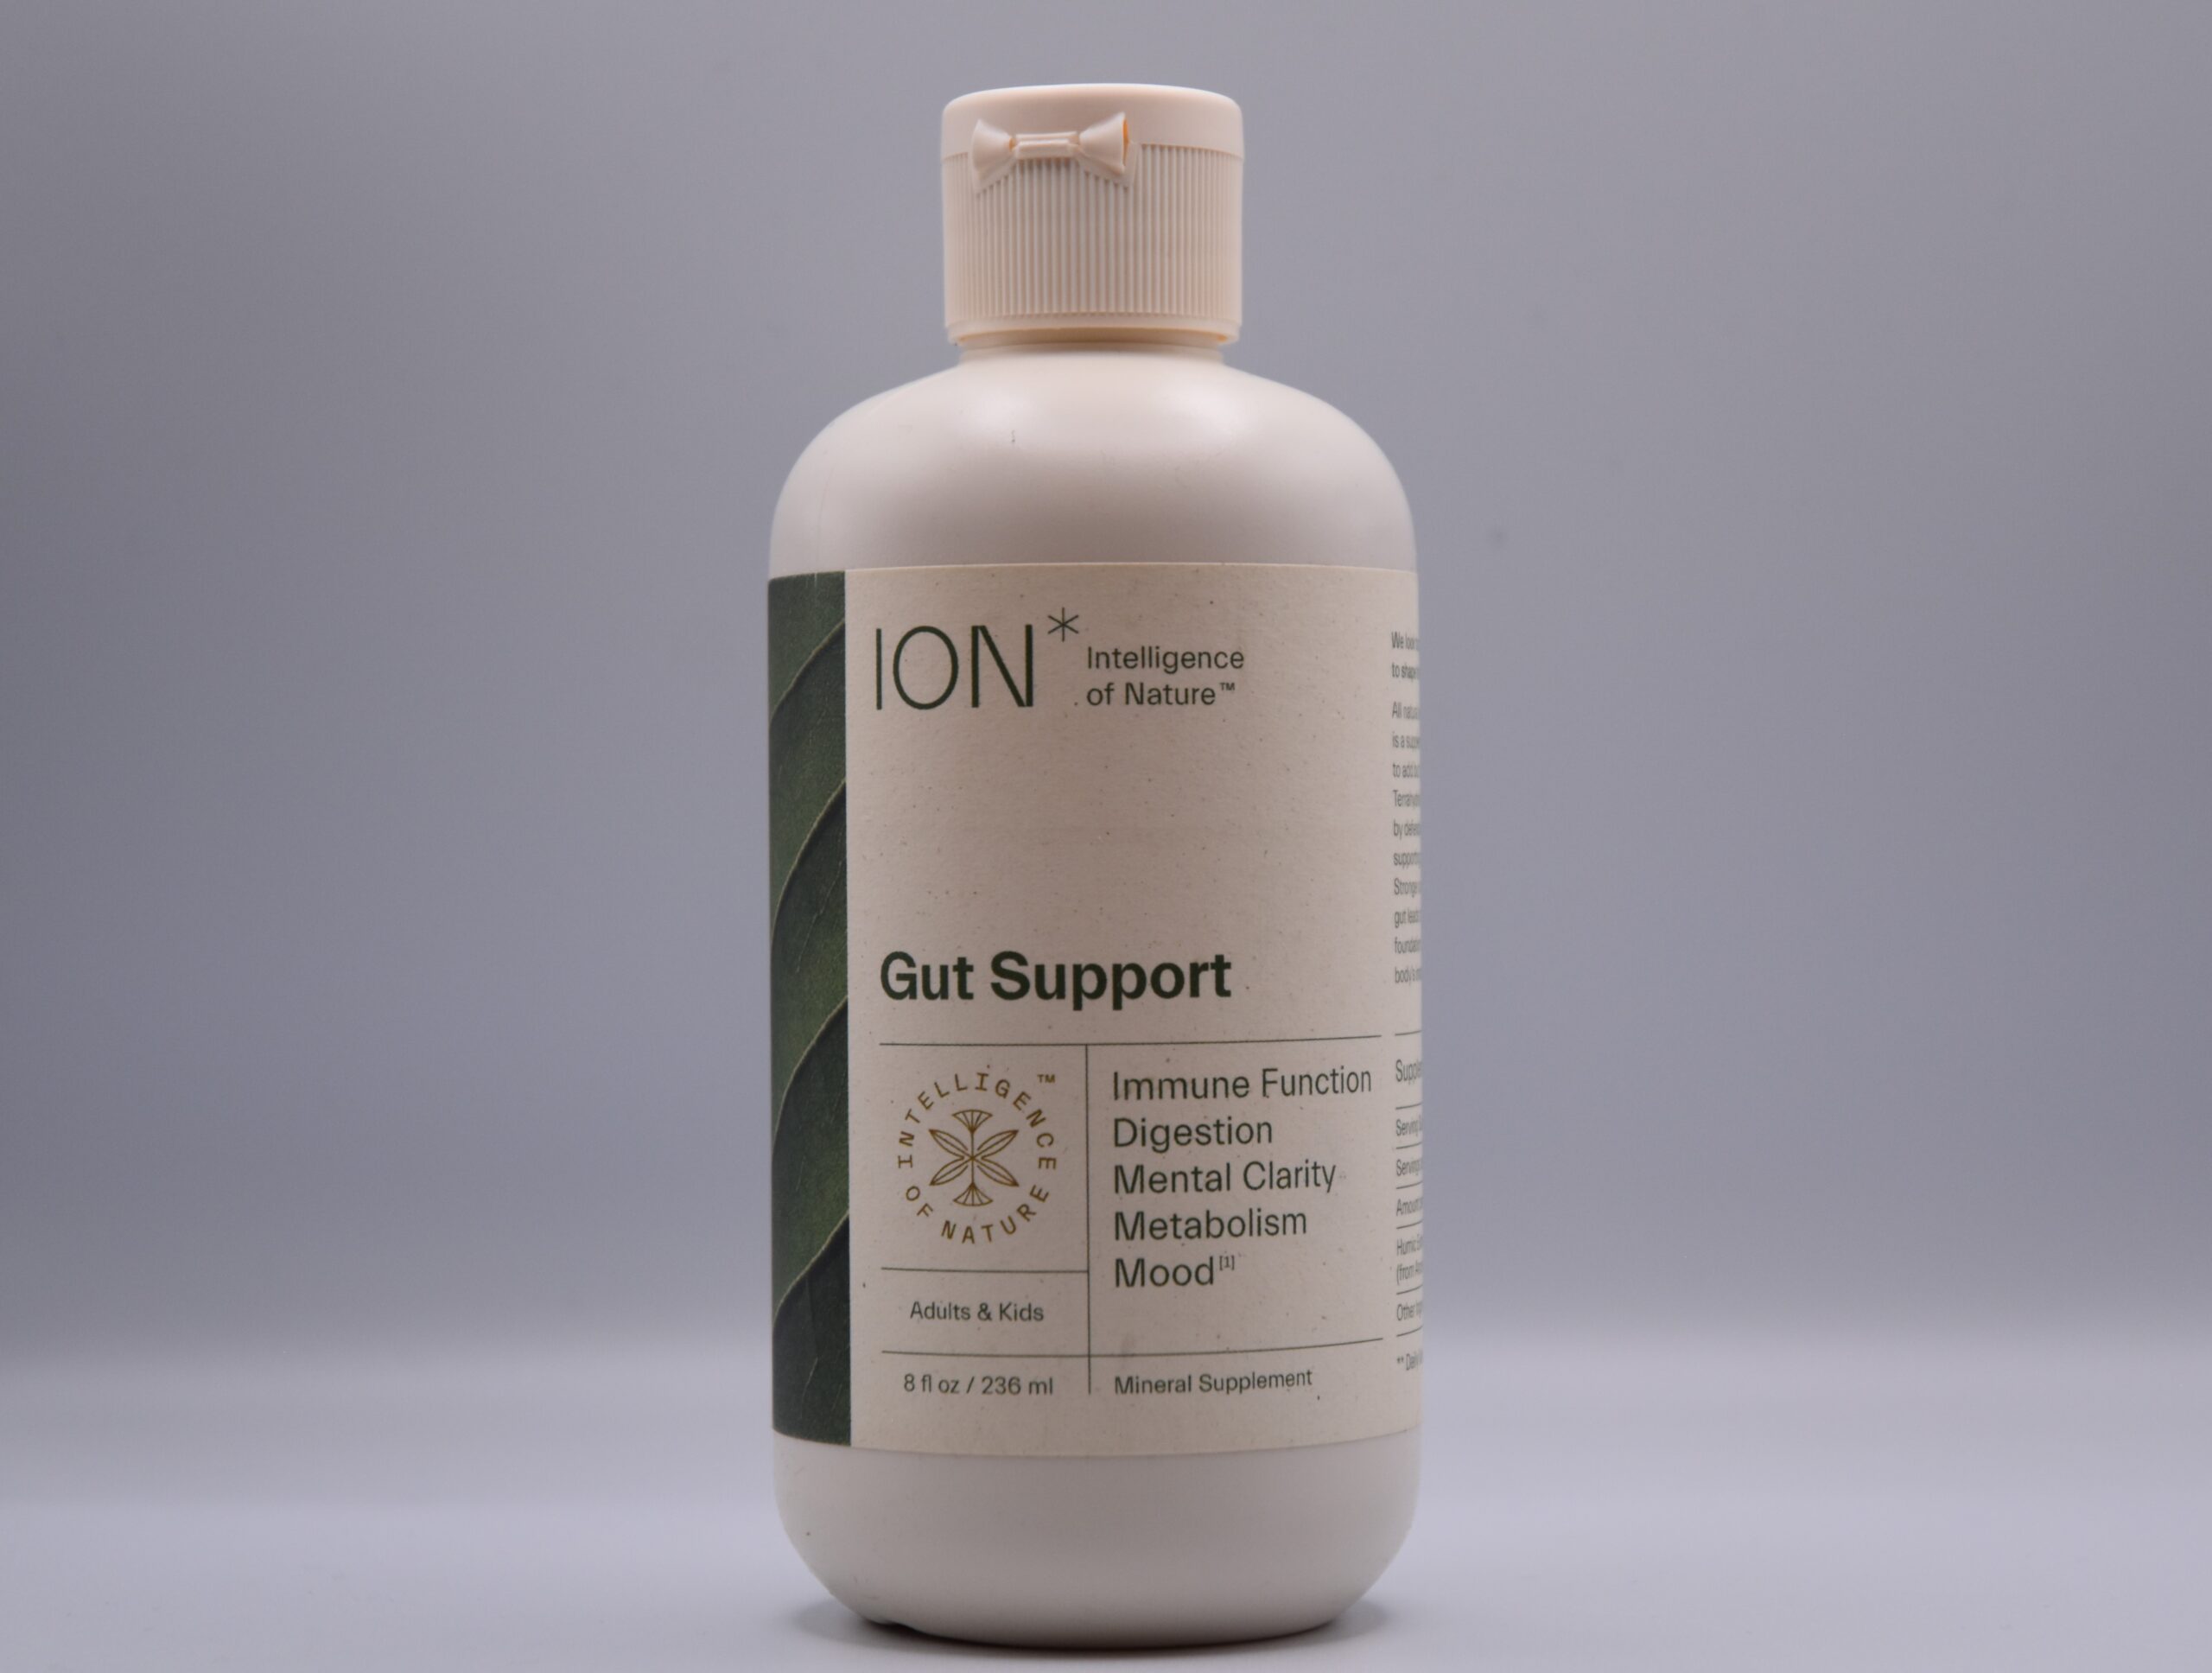 A bottle of Ion Gut Health / Restore - 8oz dietary supplement against a neutral background, highlighting its benefits for immune function, digestion, mental clarity, metabolism, and mood for both adults and kids.